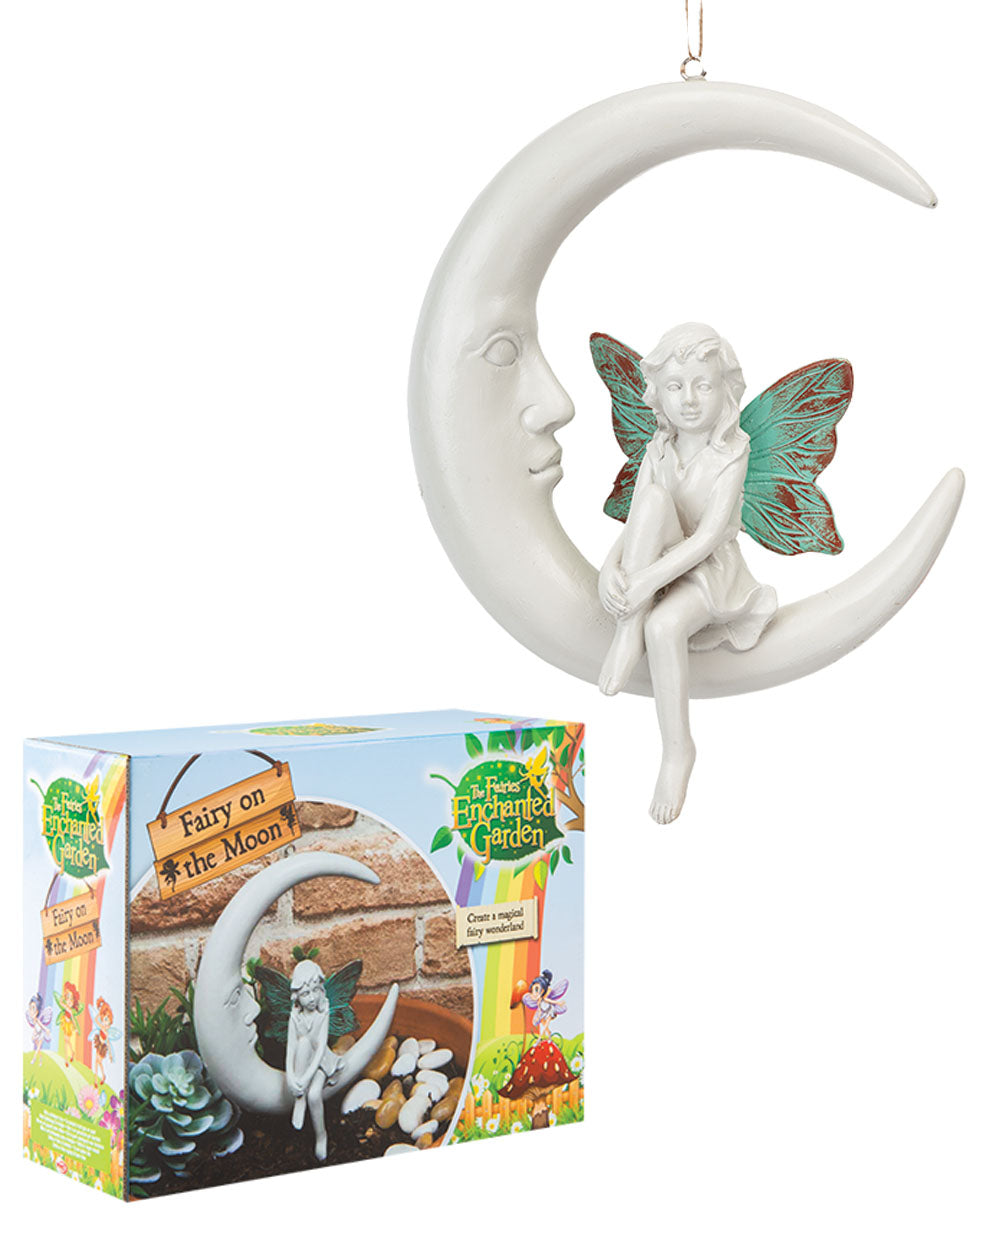 Fairy sitting on a moon with colourful wings, hanging garden ornament displayed on a white background featured with its box